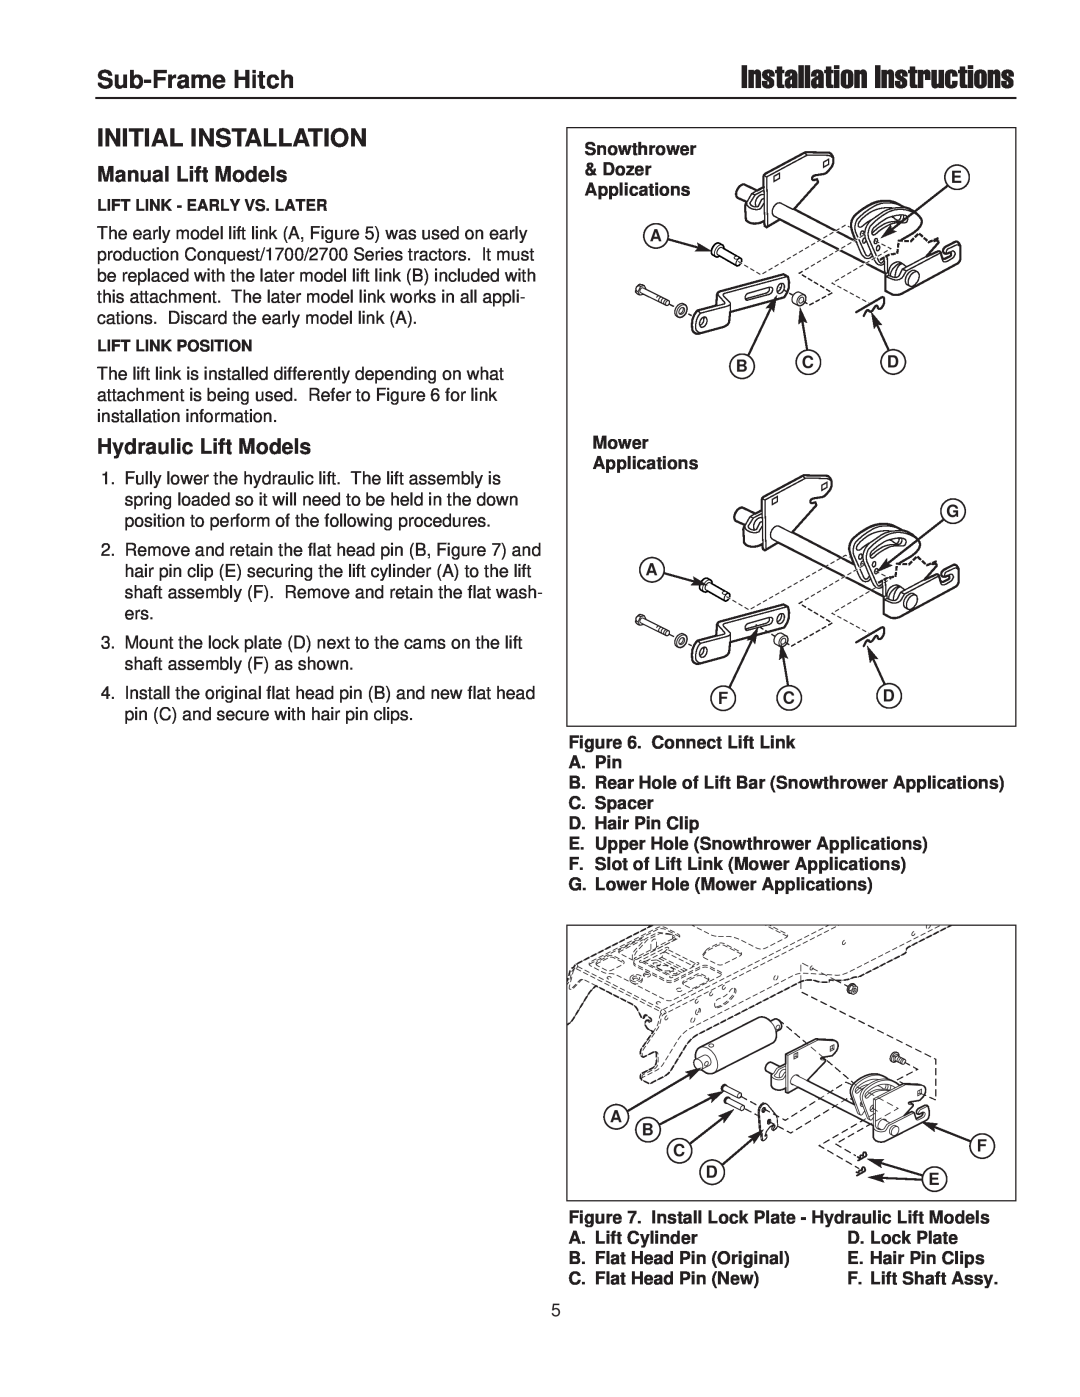 Briggs & Stratton 2600, 1600, 2800 Installation Instructions, Initial Installation, Sub-Frame Hitch, Manual Lift Models 